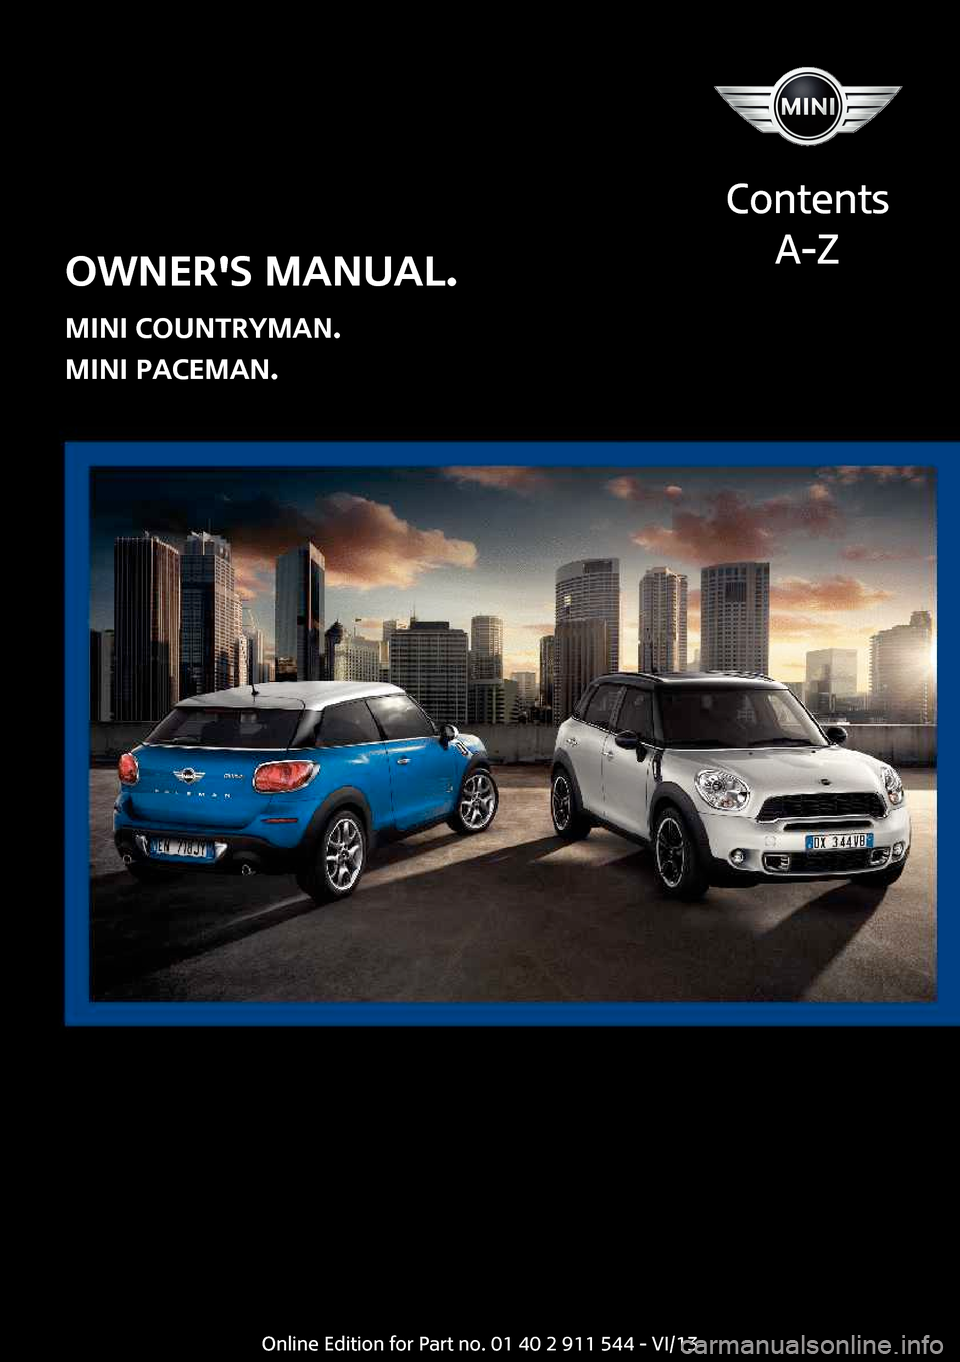 MINI Paceman 2014  Owners Manual (Mini Connected) Owners Manual.
MINI Countryman.
MINI Paceman.
Contents
A-ZOnline Edition for Part no. 01 40 2 911 544 - VI/13  